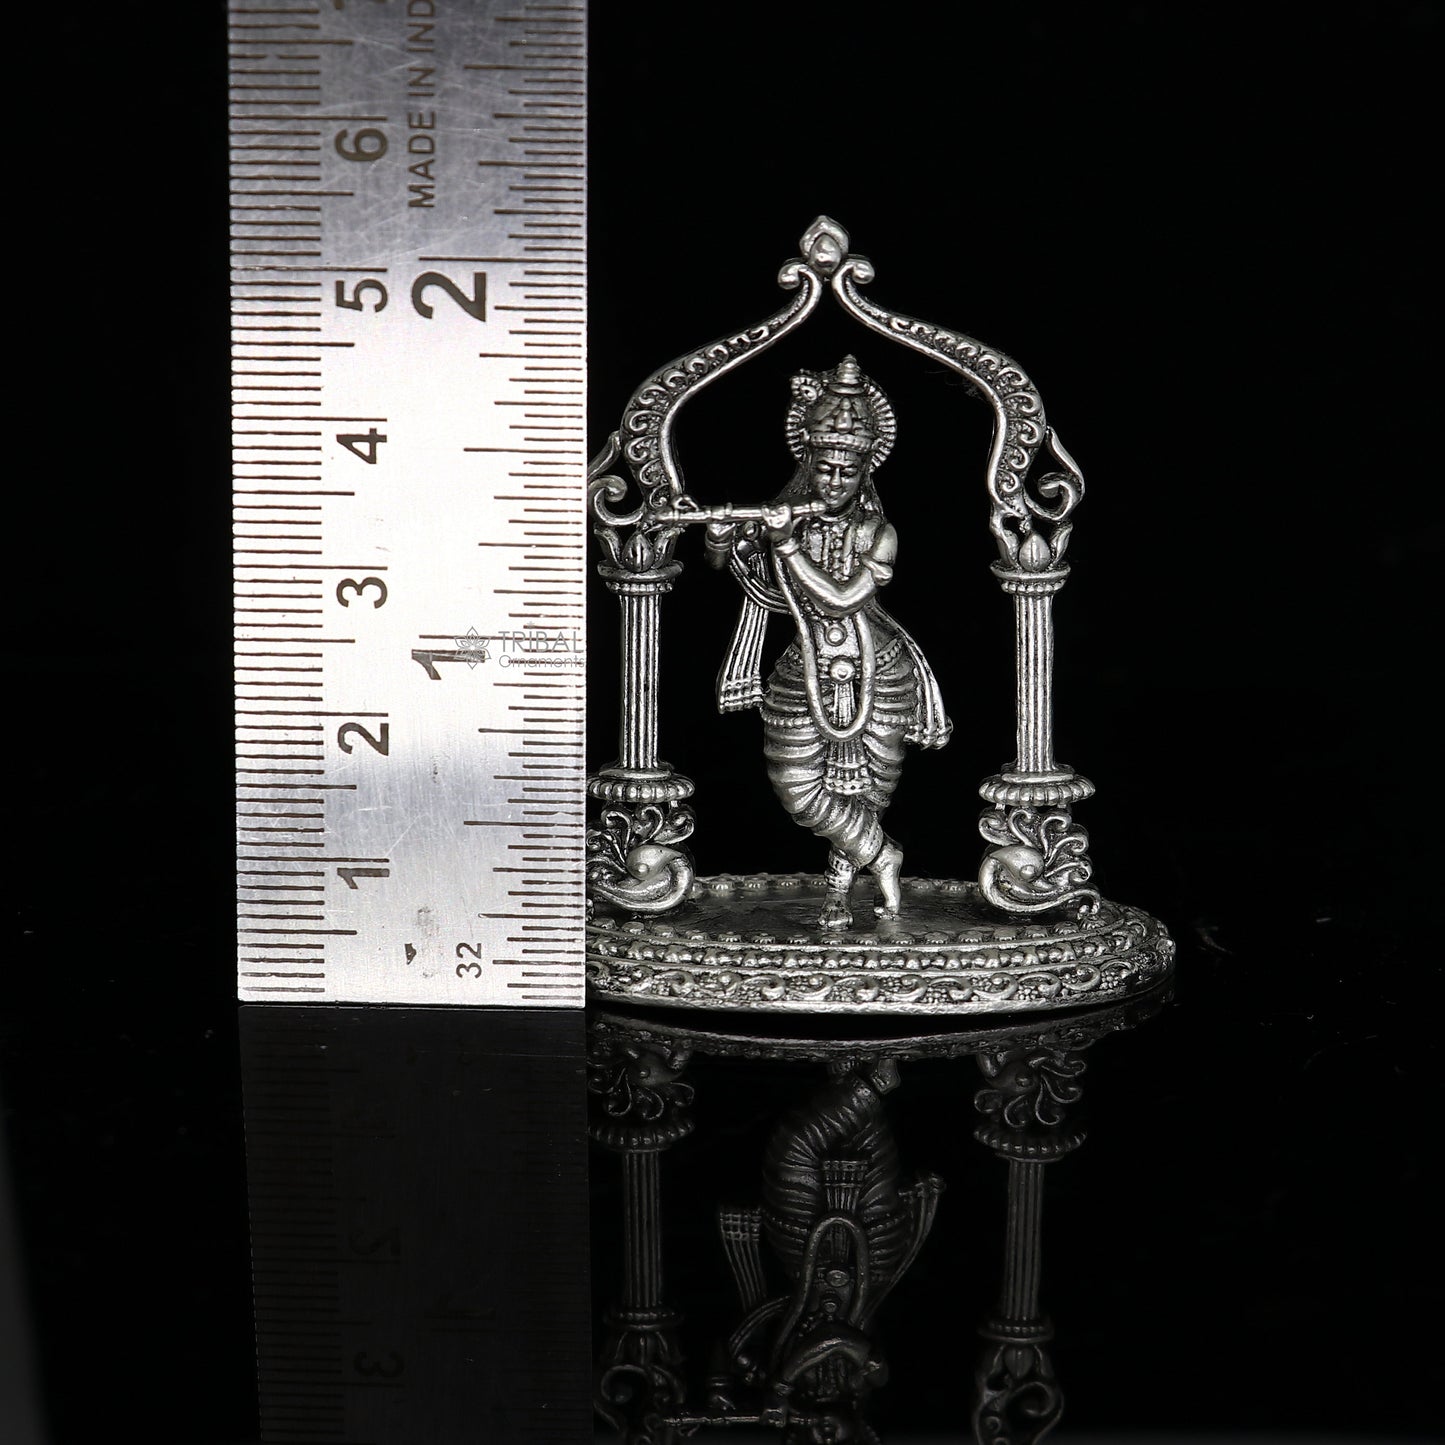 925 Sterling silver handmade Idols Lord Krishna with flute standing Statue figurine, puja articles divine decorative gift art688 - TRIBAL ORNAMENTS